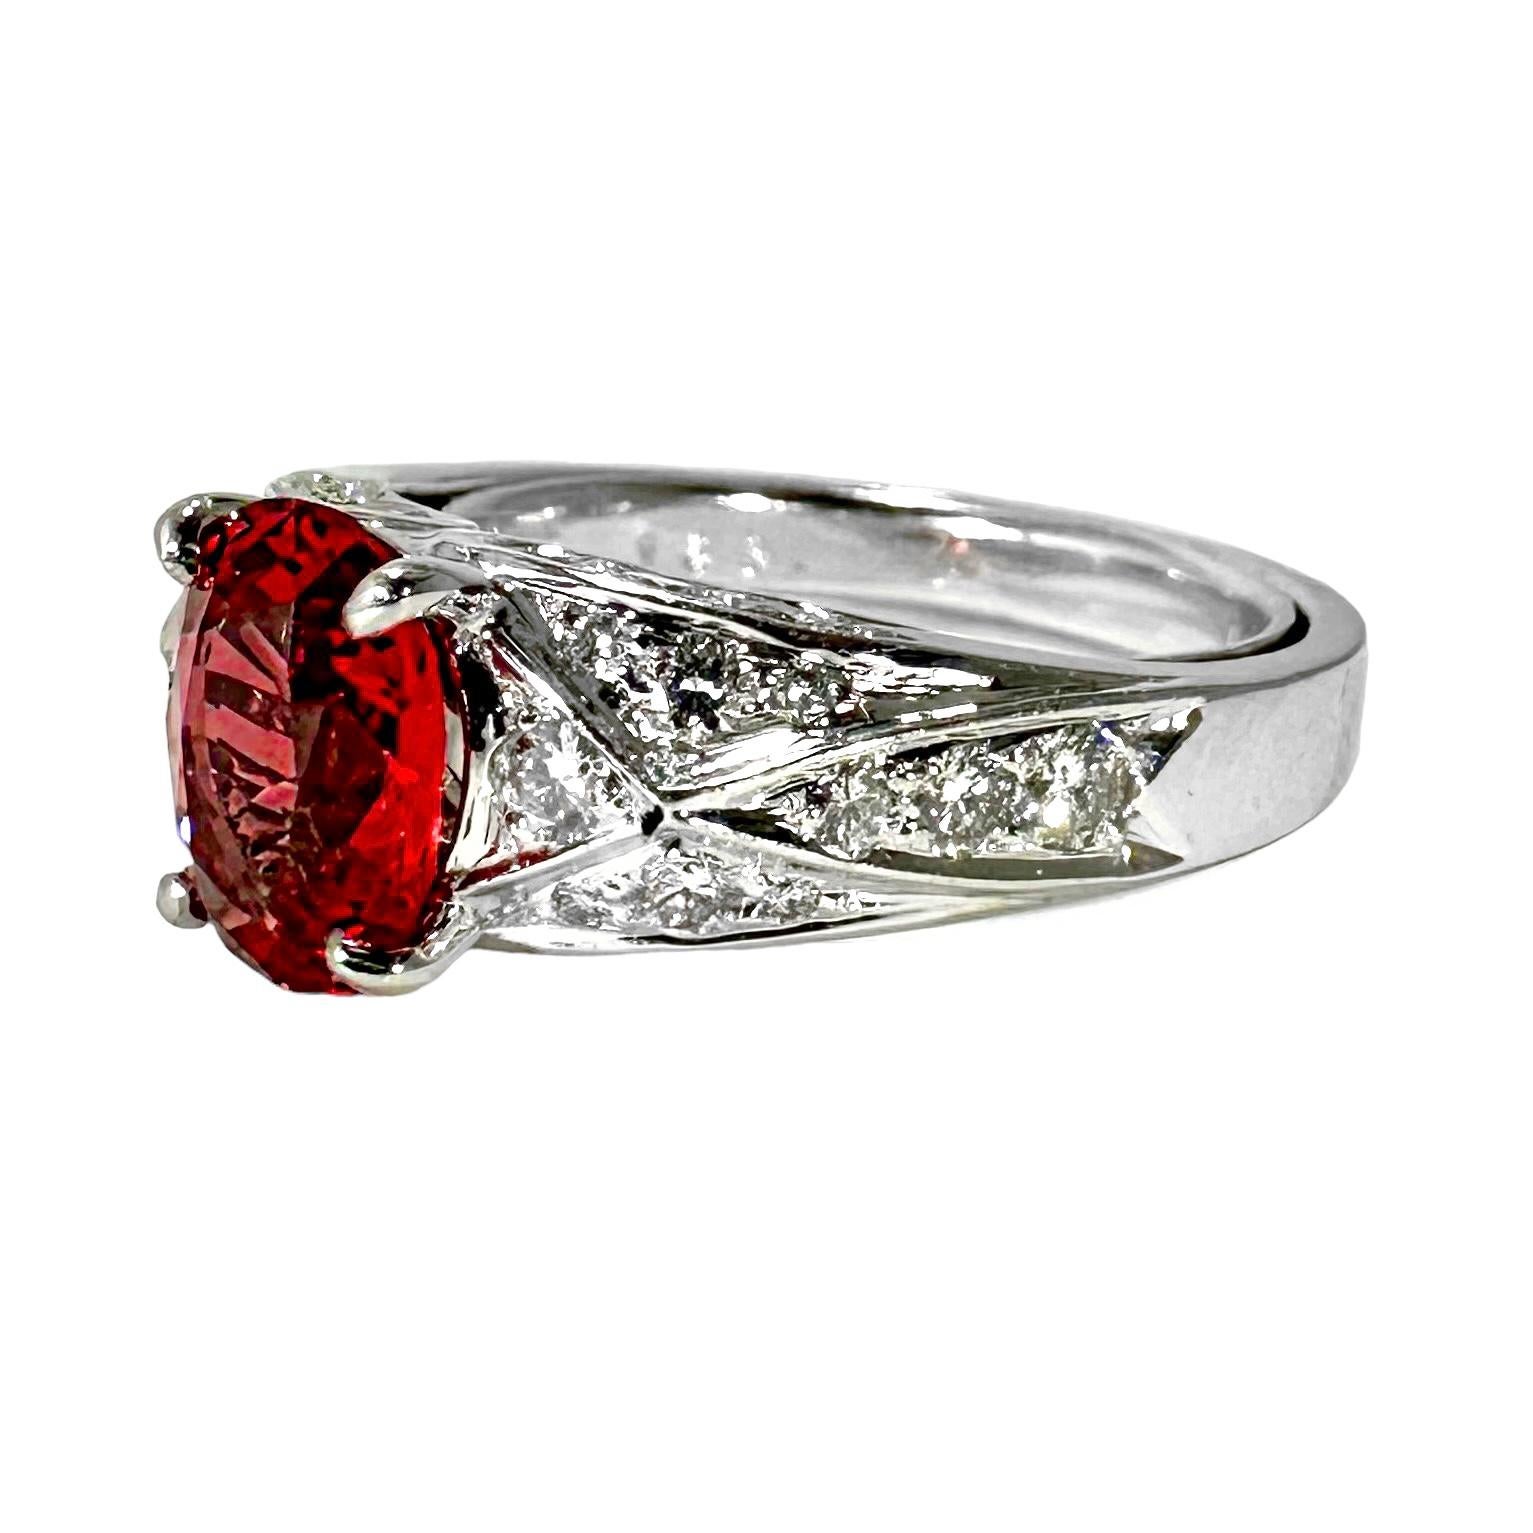 Vivid Oval Shaped Orangy-Red Burmese Spinel set in Platinum Ring with Diamonds 1